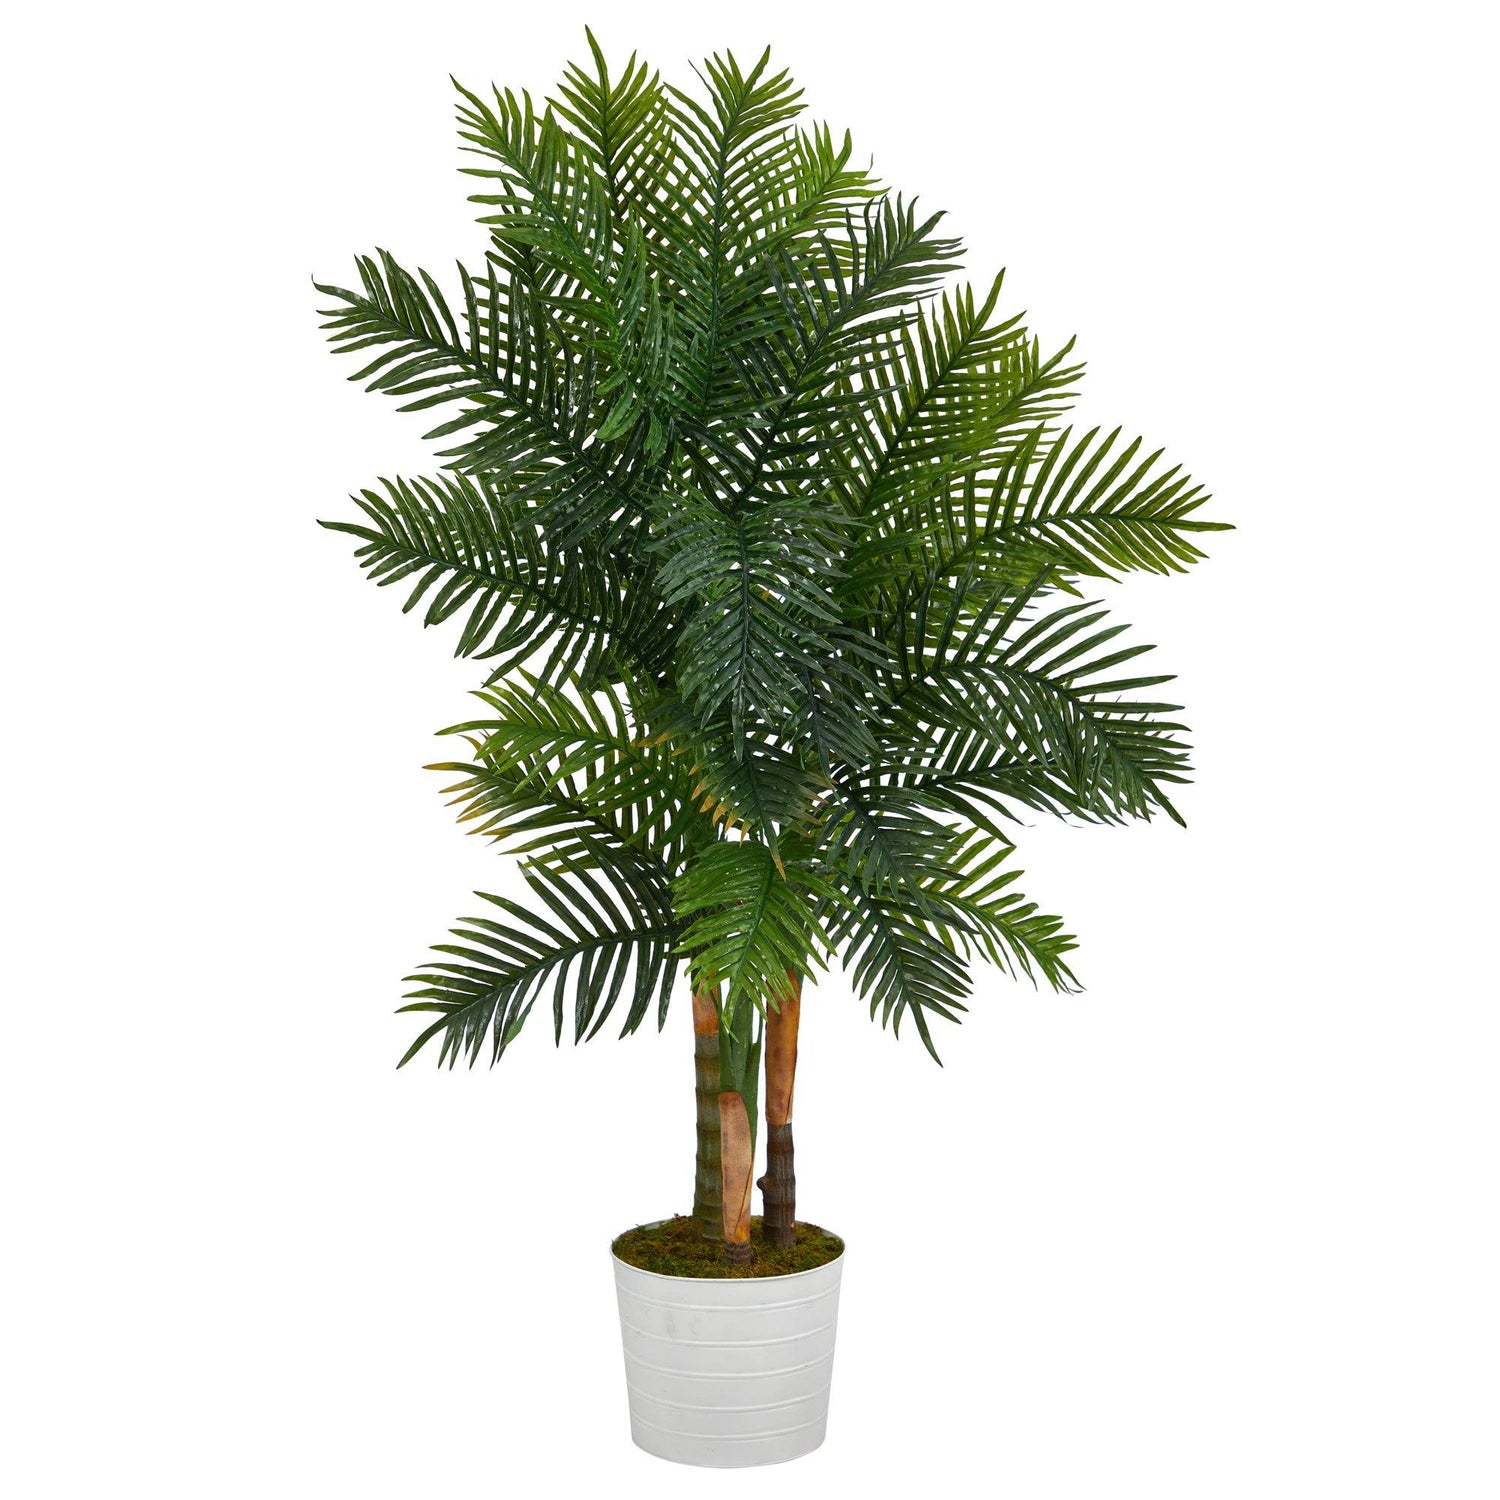 62” Areca Palm Artificial Tree in White Tin Planter (Real Touch)